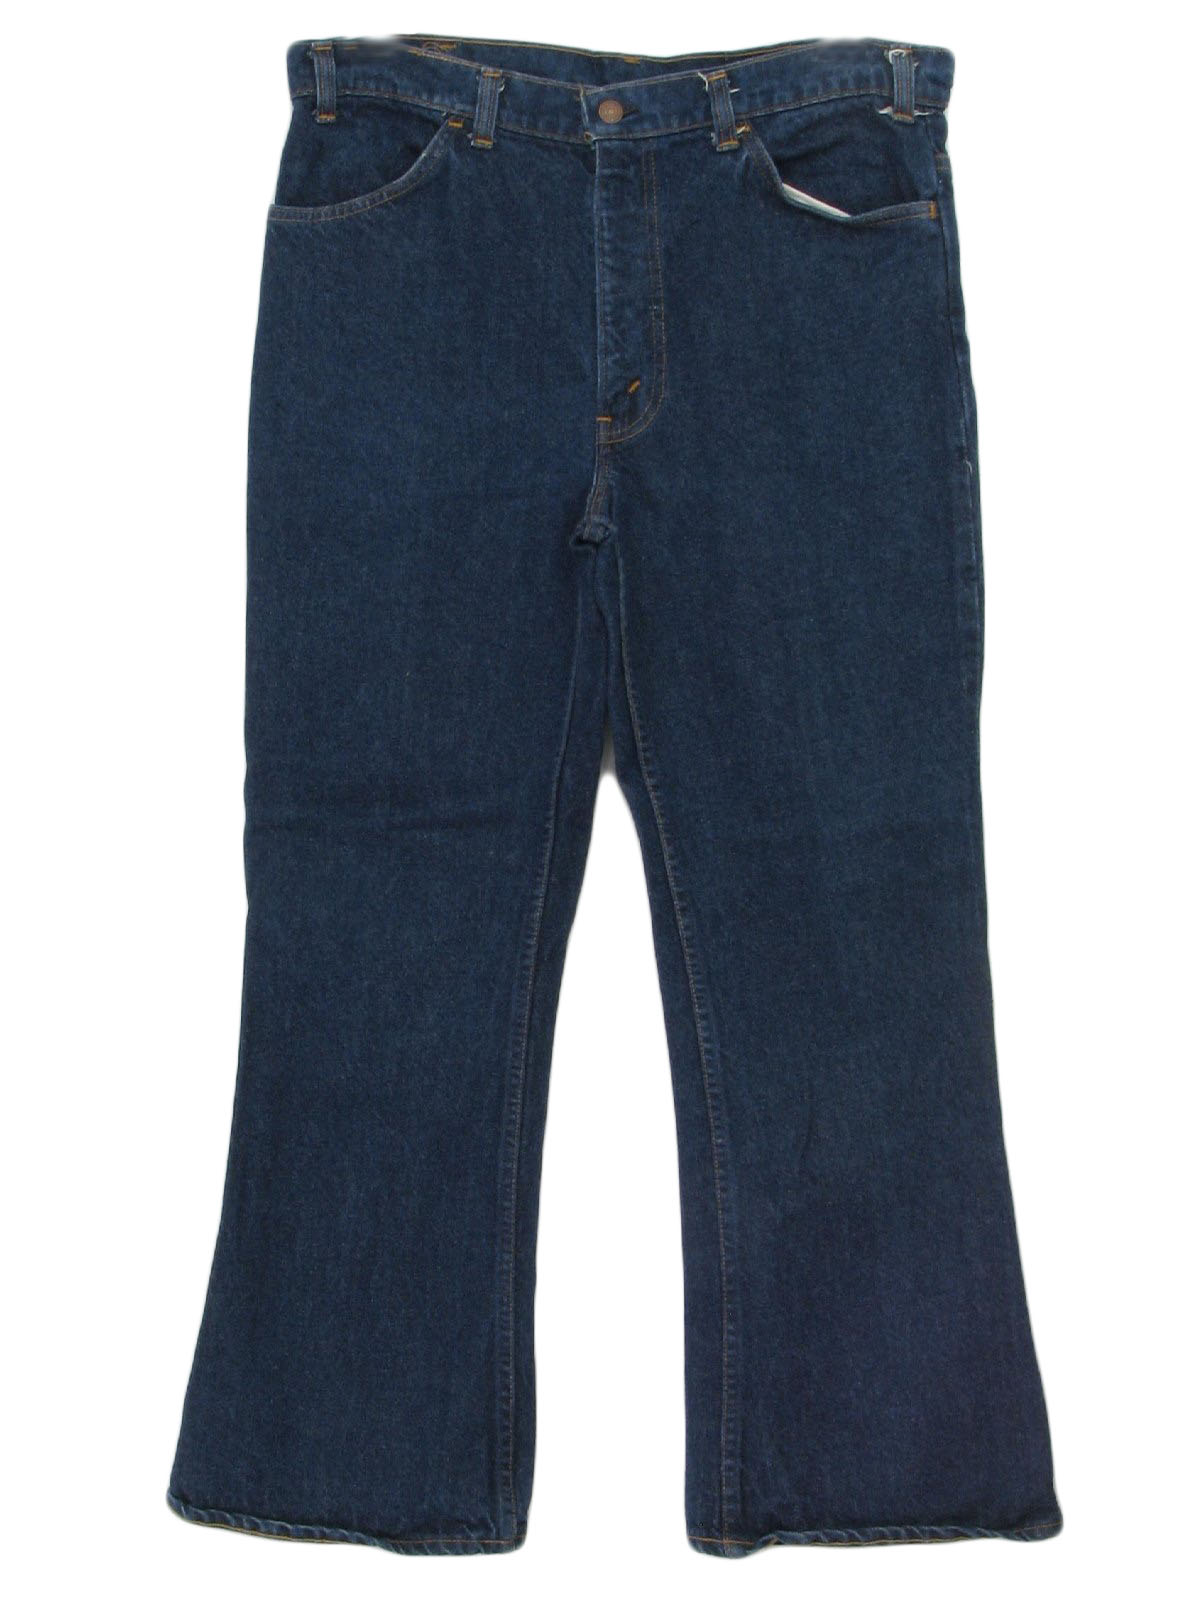 60s Flared Pants / Flares (Levis): Late 60s or early 70s -Levis- Mens dark  blue cotton denim, high waist flared pants with four top entry pockets,  button/ talon 42 stamped zip front